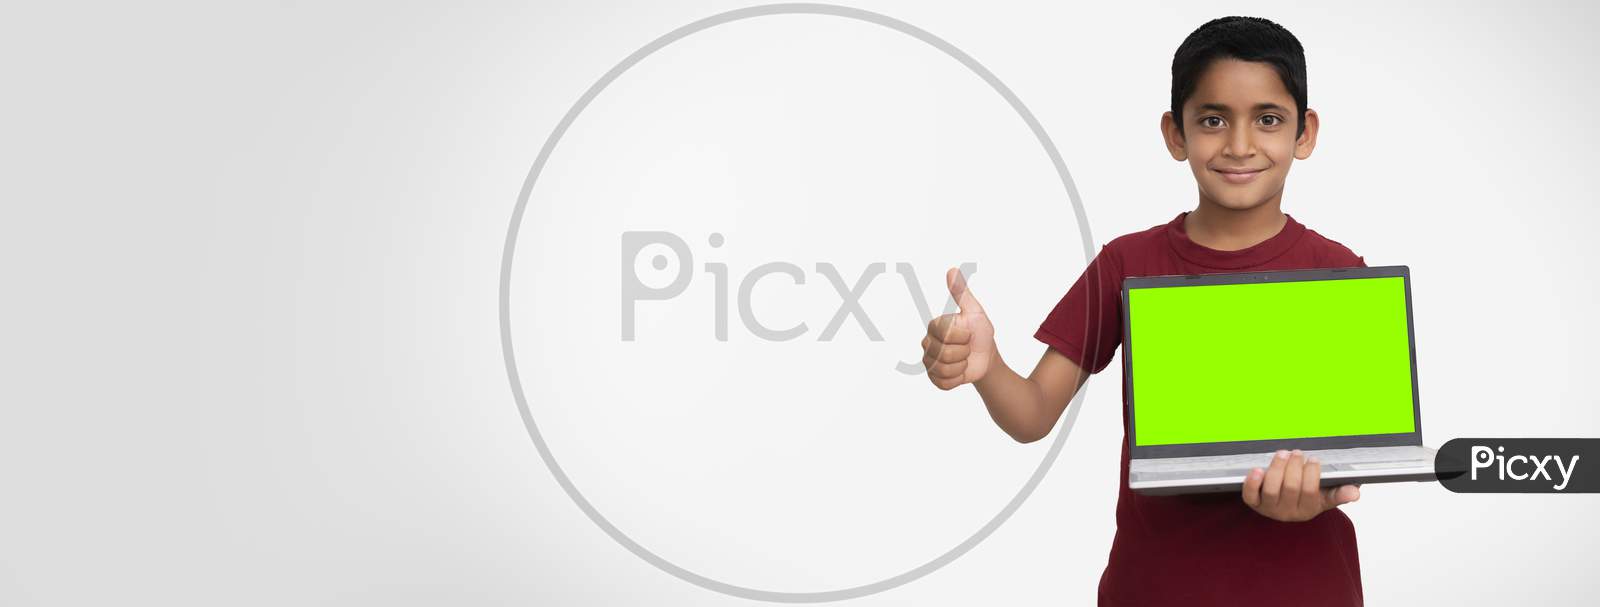 Banner Image Of A Young Indian Kid Holding A Laptop With Green Screen In His Hands And Showing Thumbs Up To The Camera. Standing On A White Isolated Wall With Copy Space.